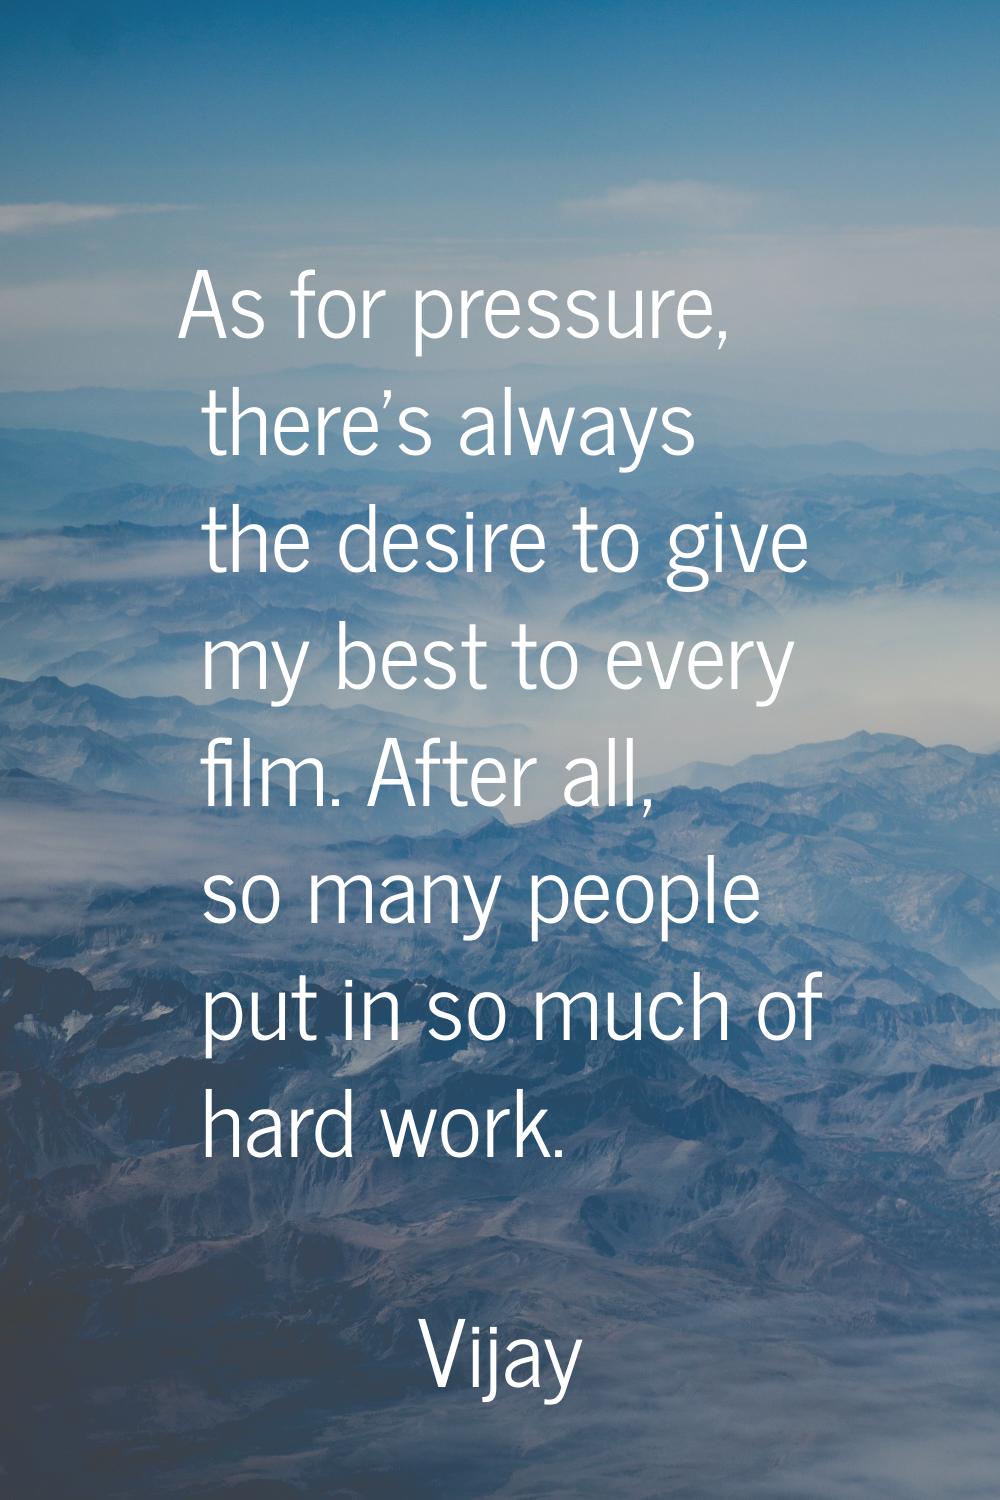 As for pressure, there's always the desire to give my best to every film. After all, so many people